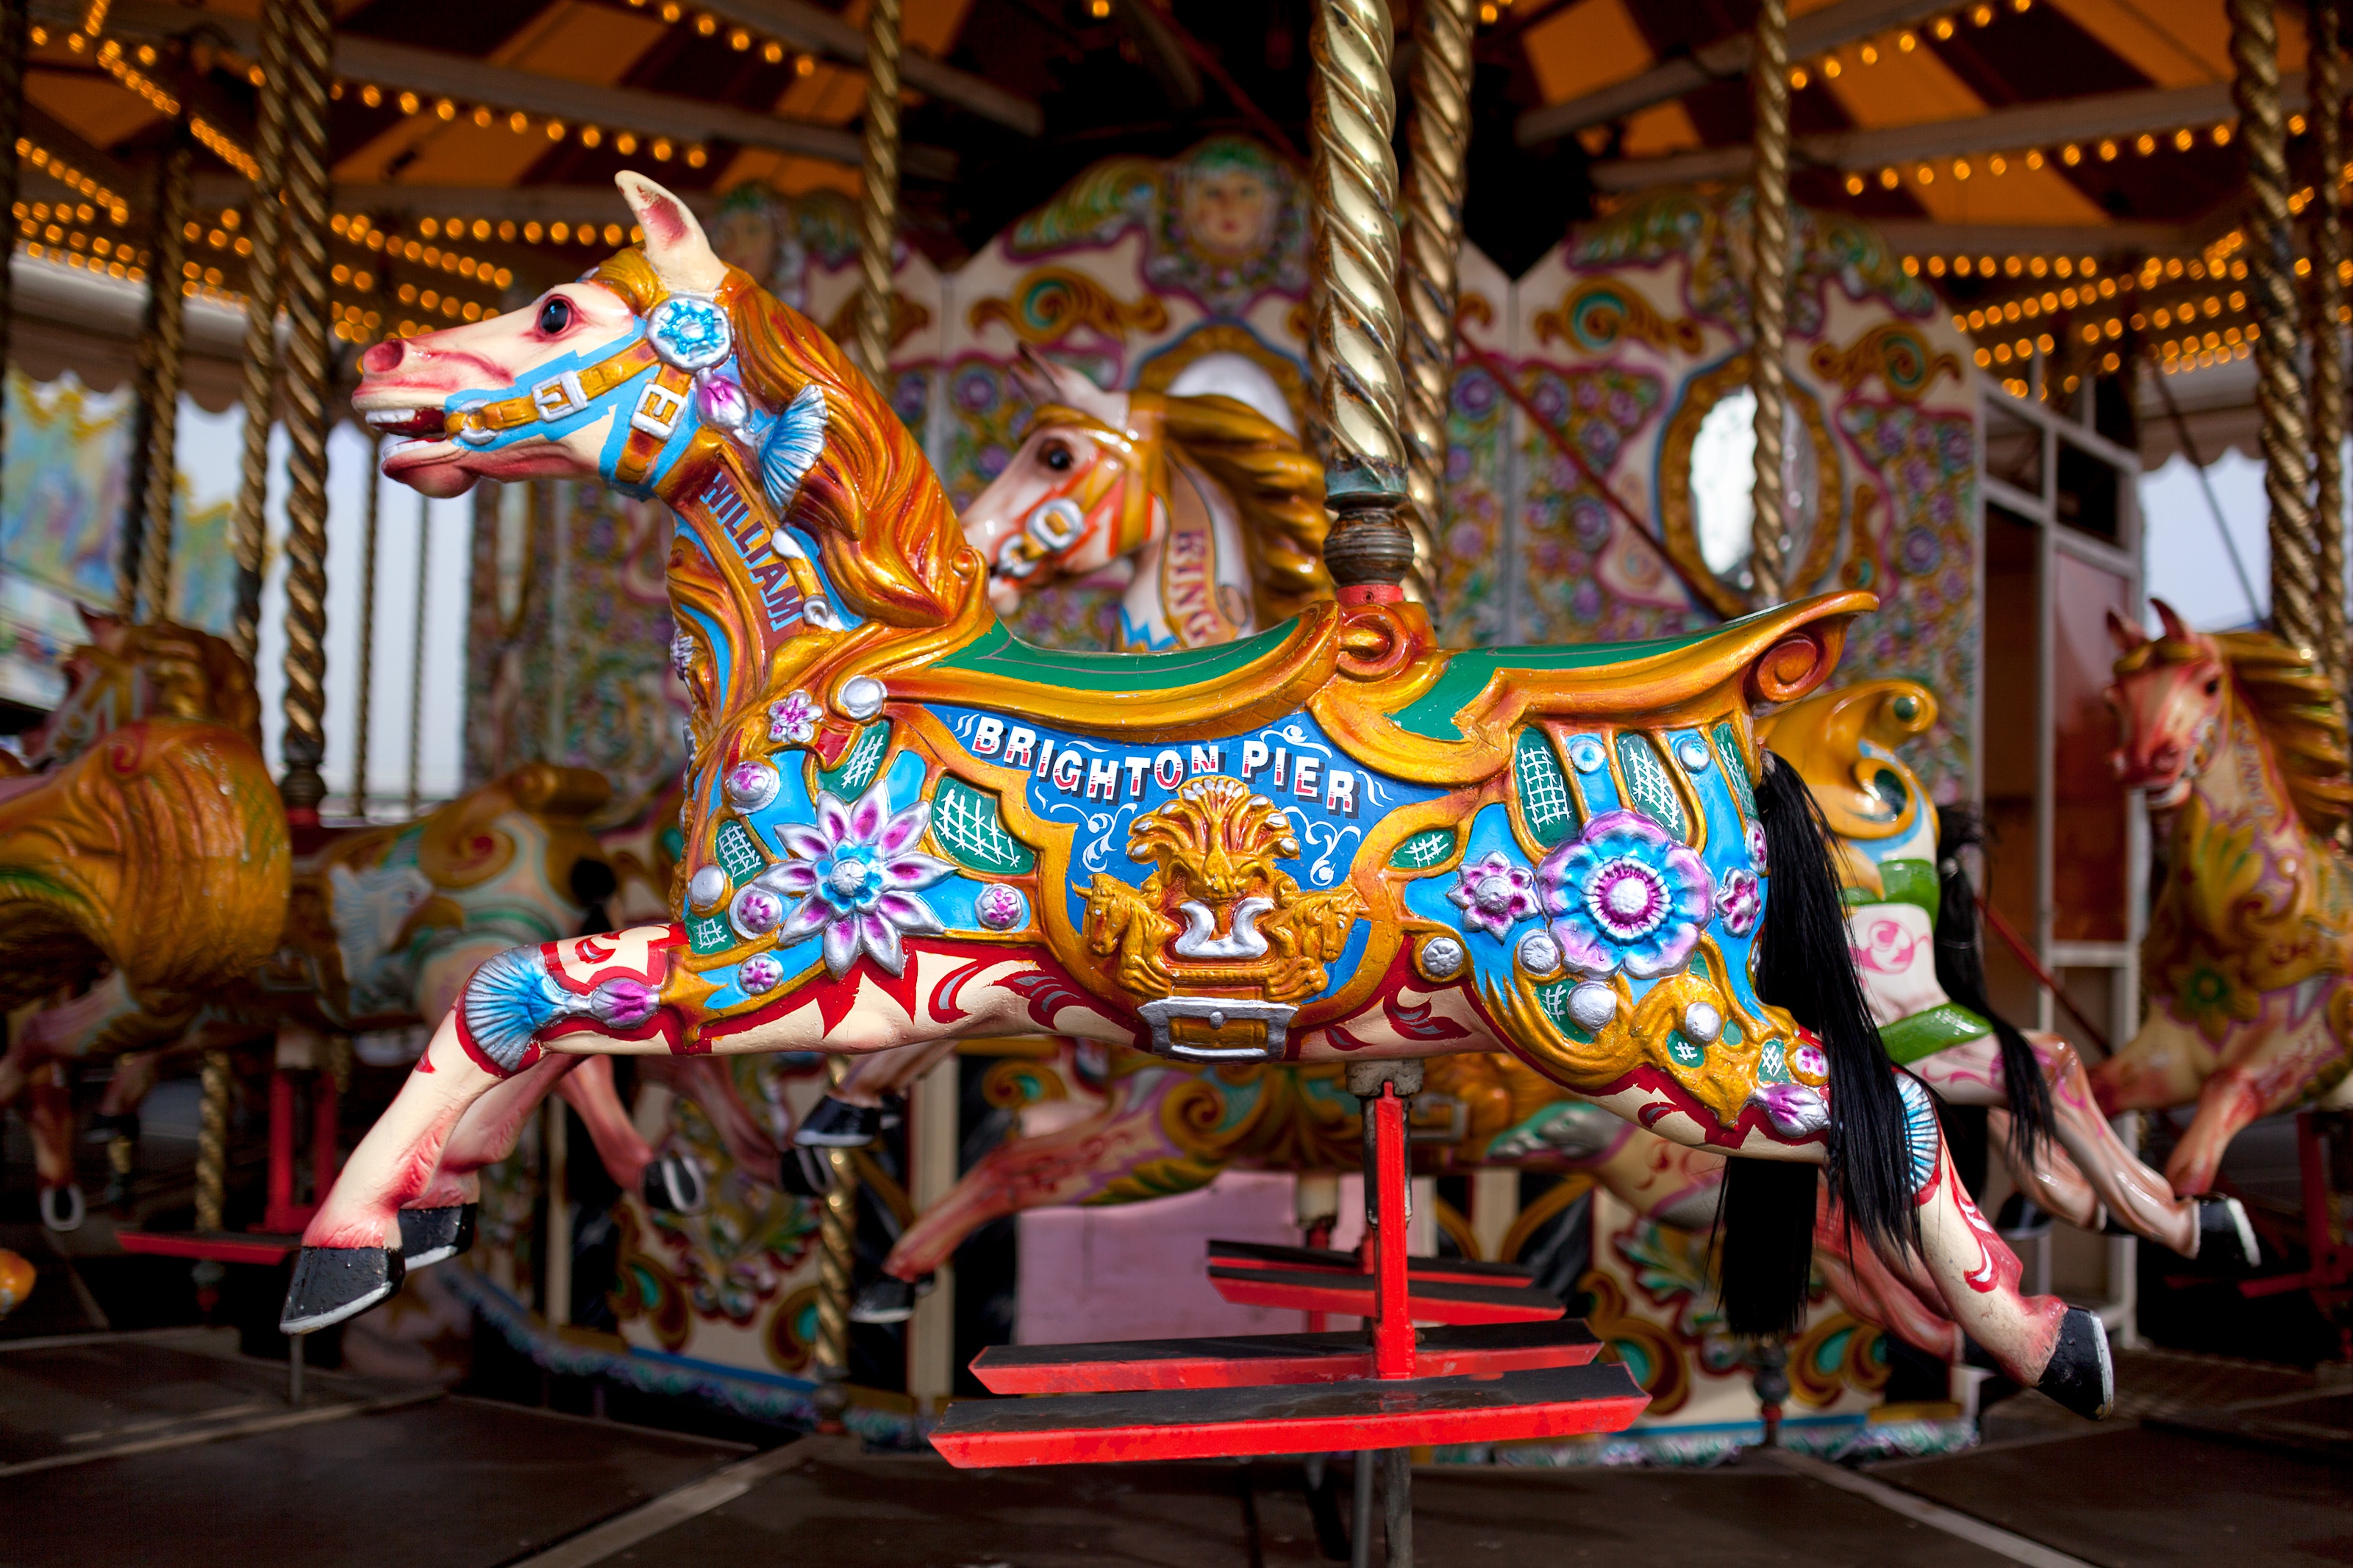 A merry-go-roung horse by Miles Storey on unsplash